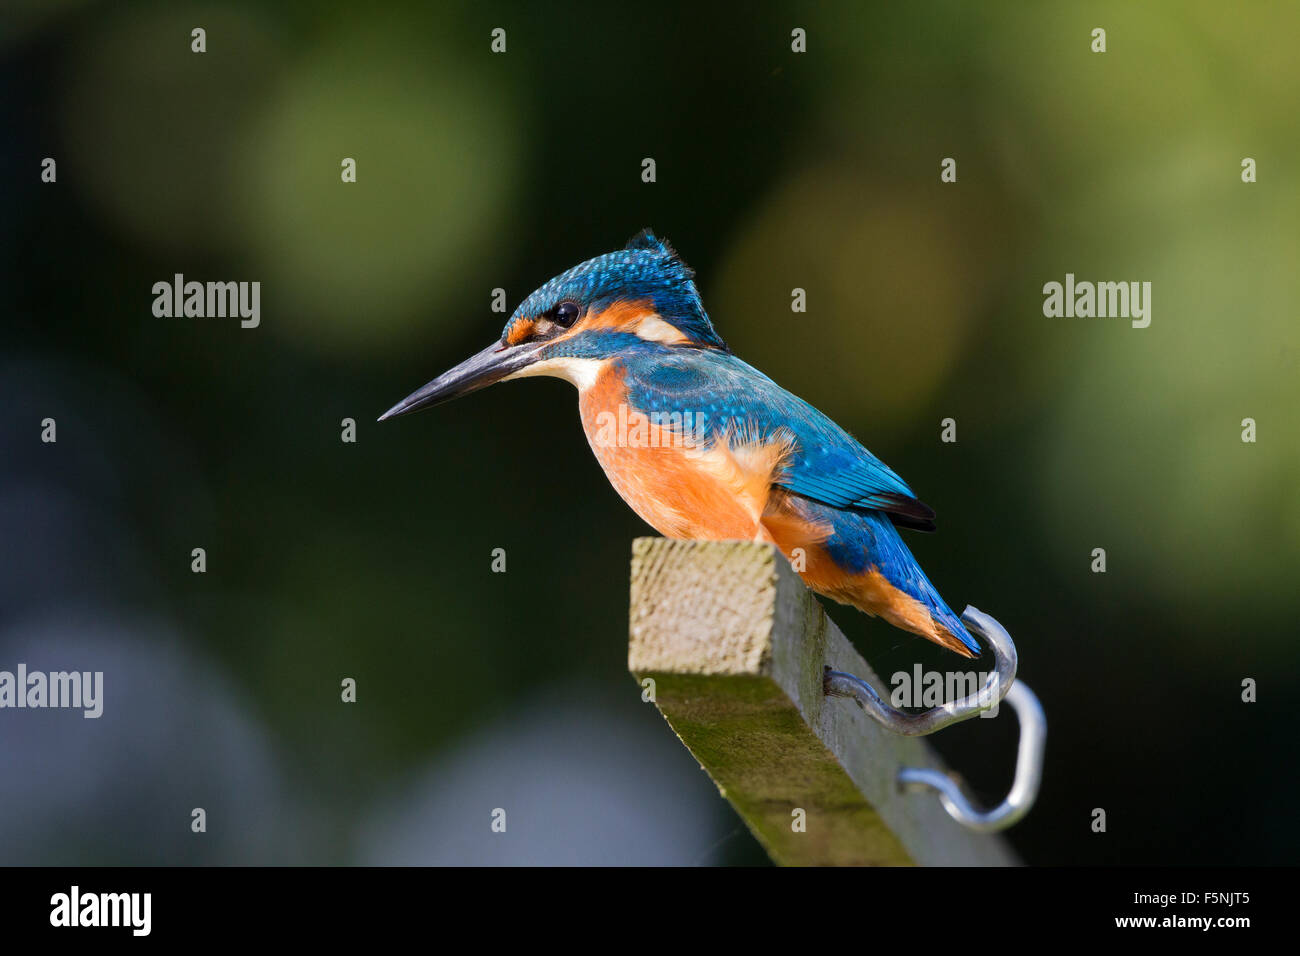 Male Kingfisher perched on bird feeder Stock Photo